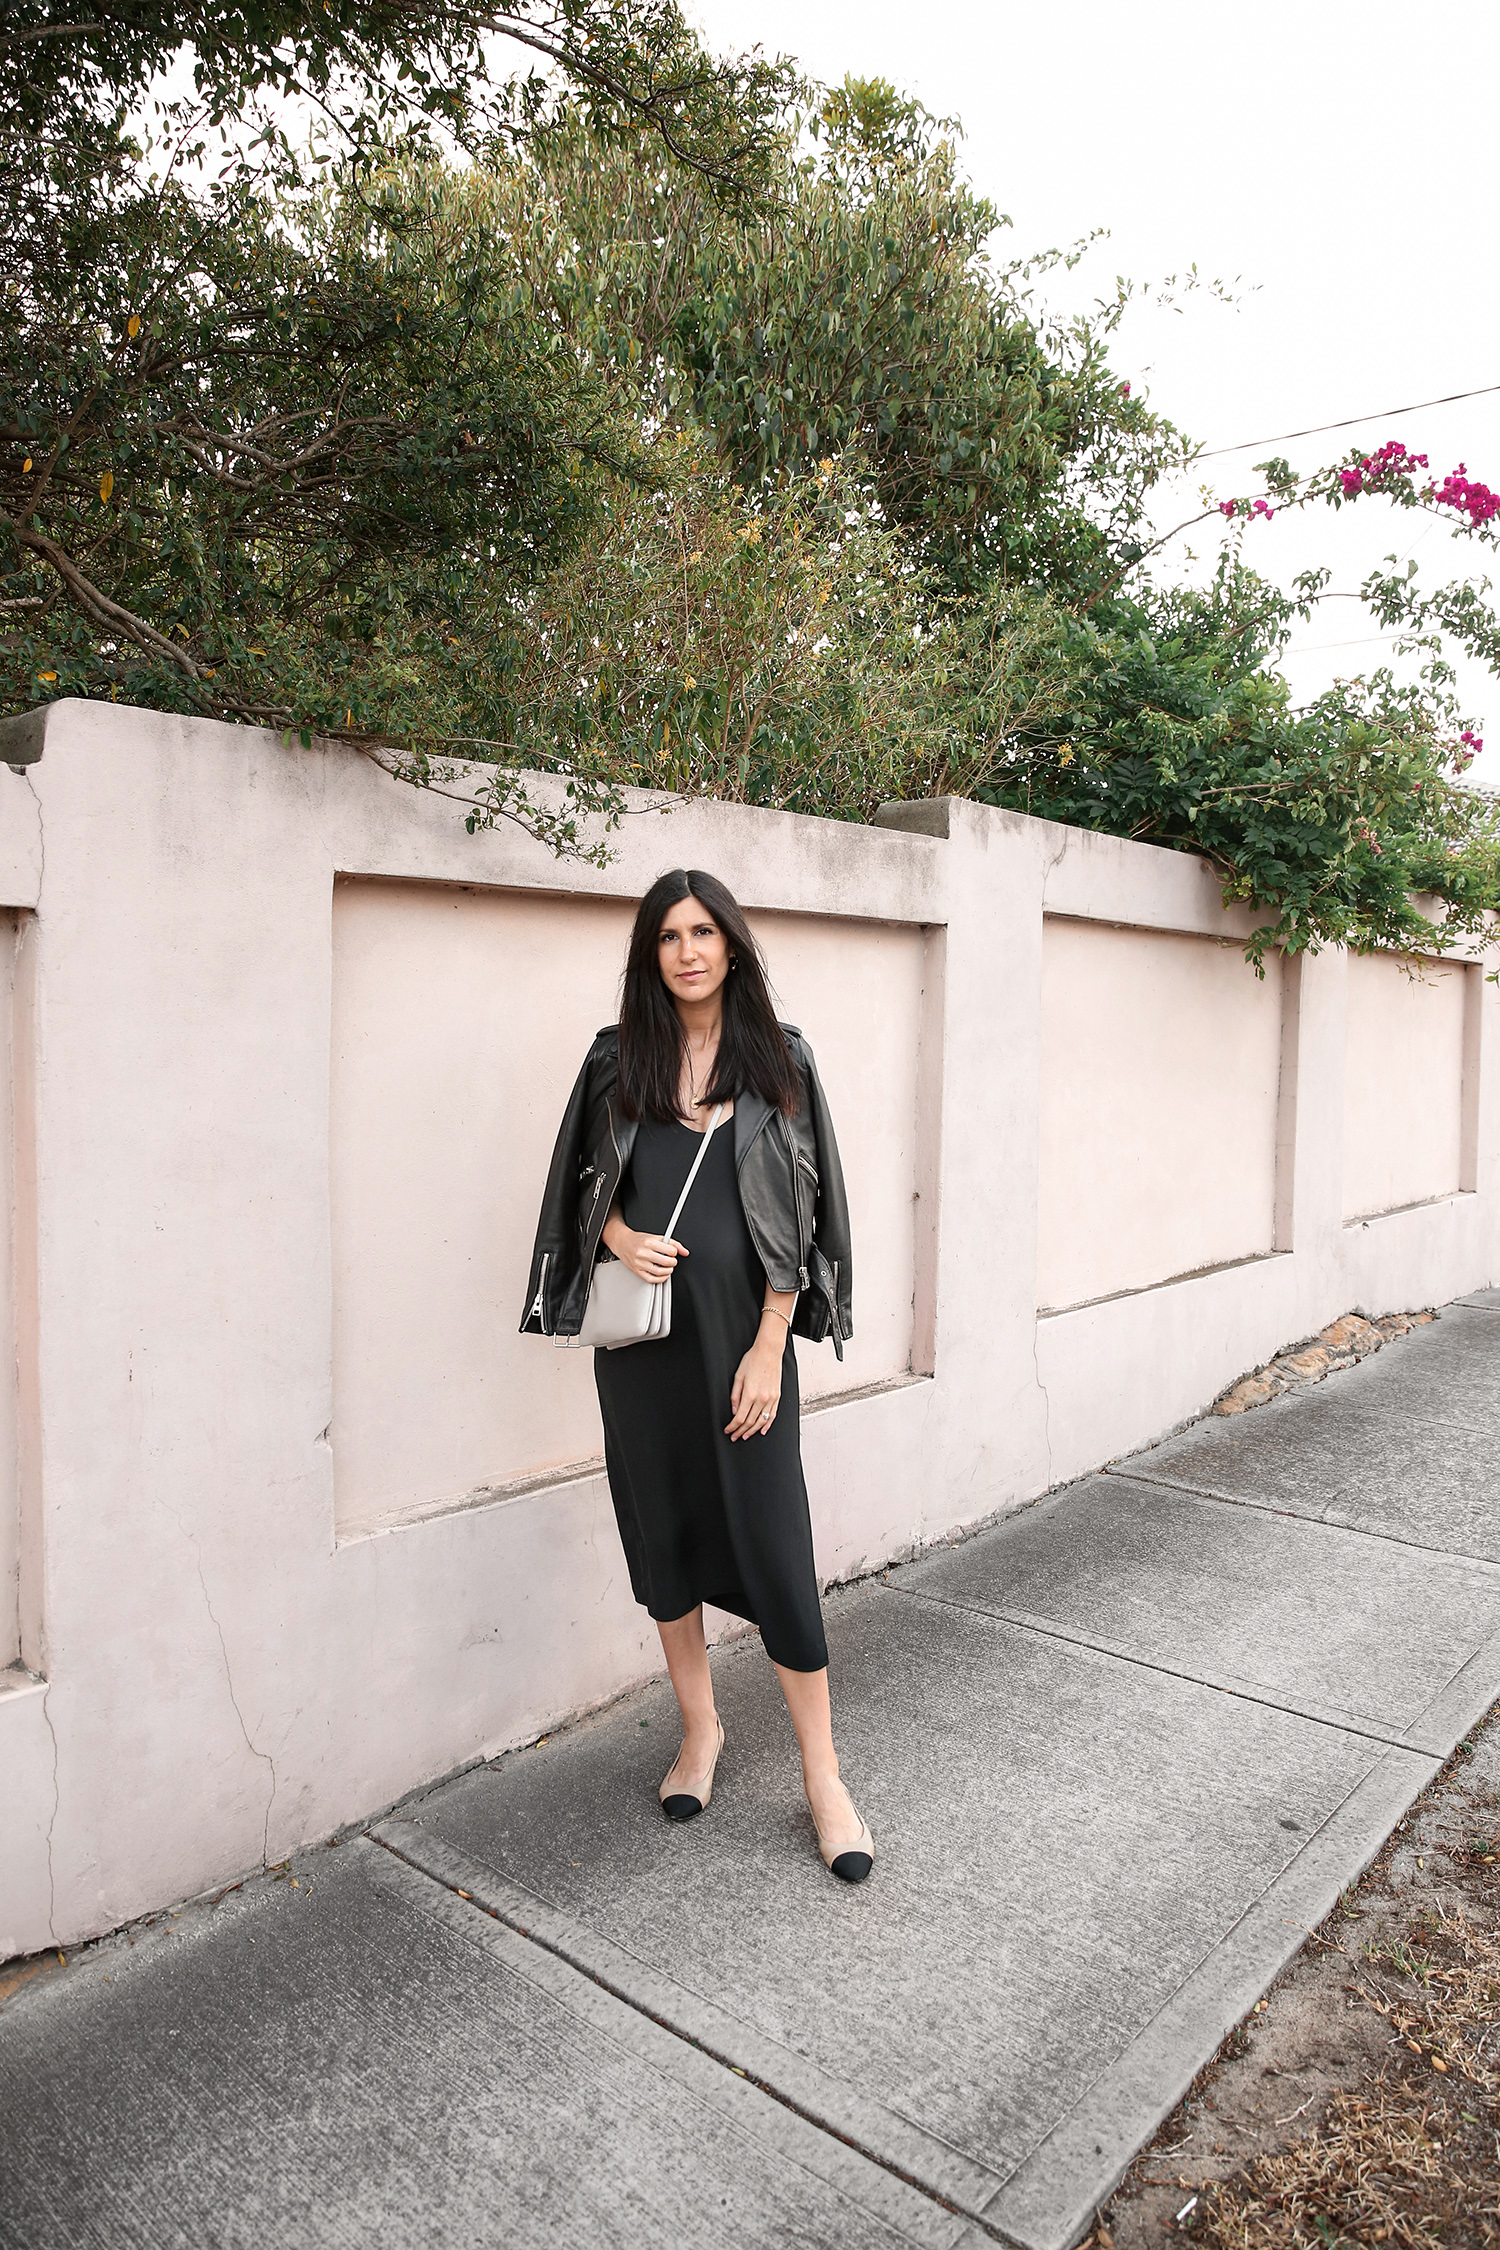 Jamie Lee of Mademoiselle wearing a minimal all black outfit